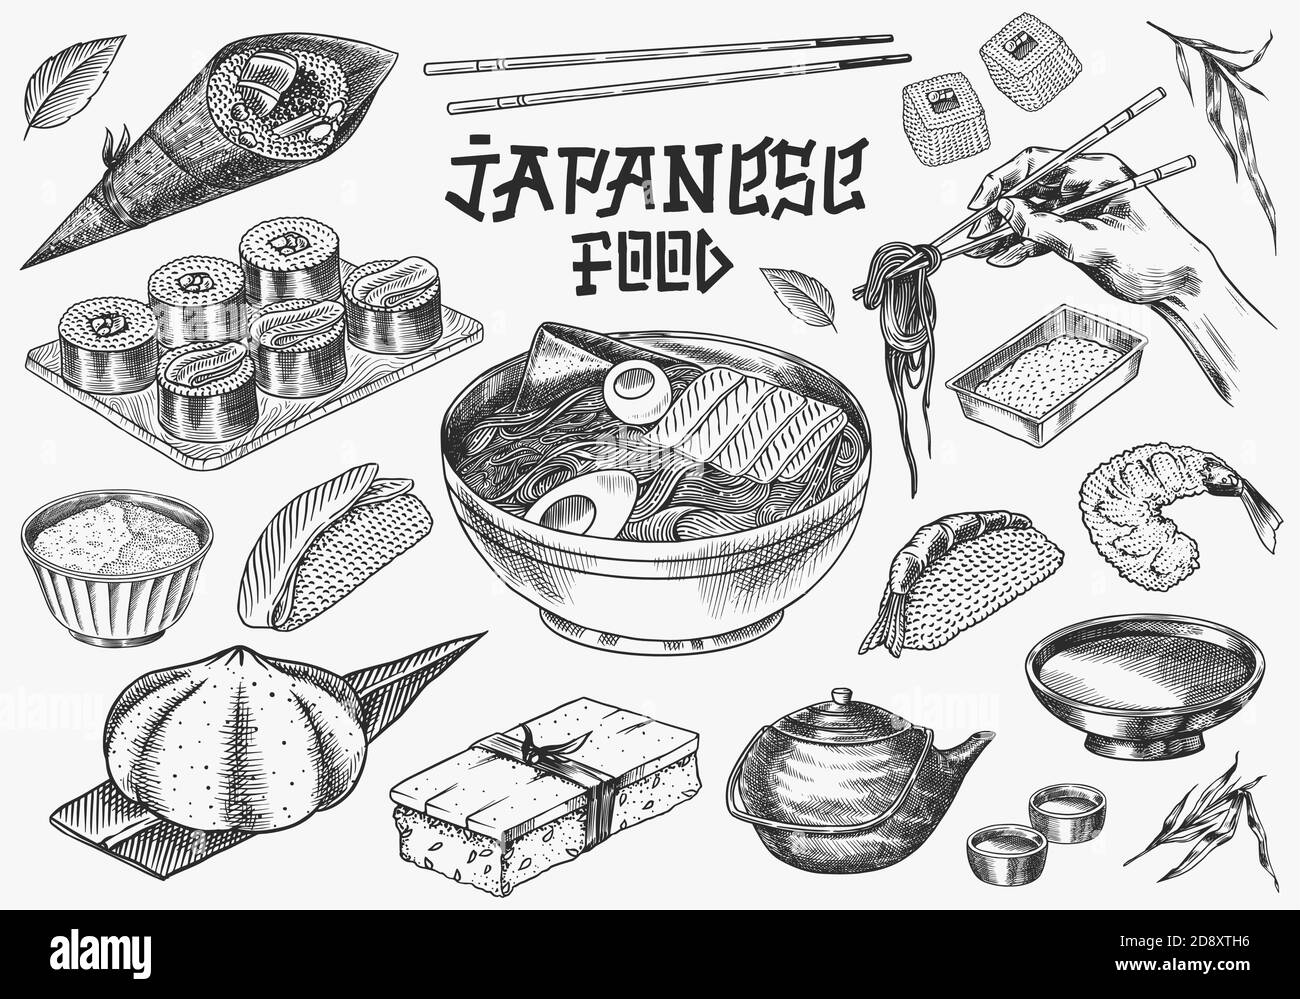 Japanese food set. Sushi bar, ramen noodles, soup in a bowl, roll and dessert, Asian tea. Soy sauce. Hand holds chopsticks. Drawn engraved sketch Stock Vector